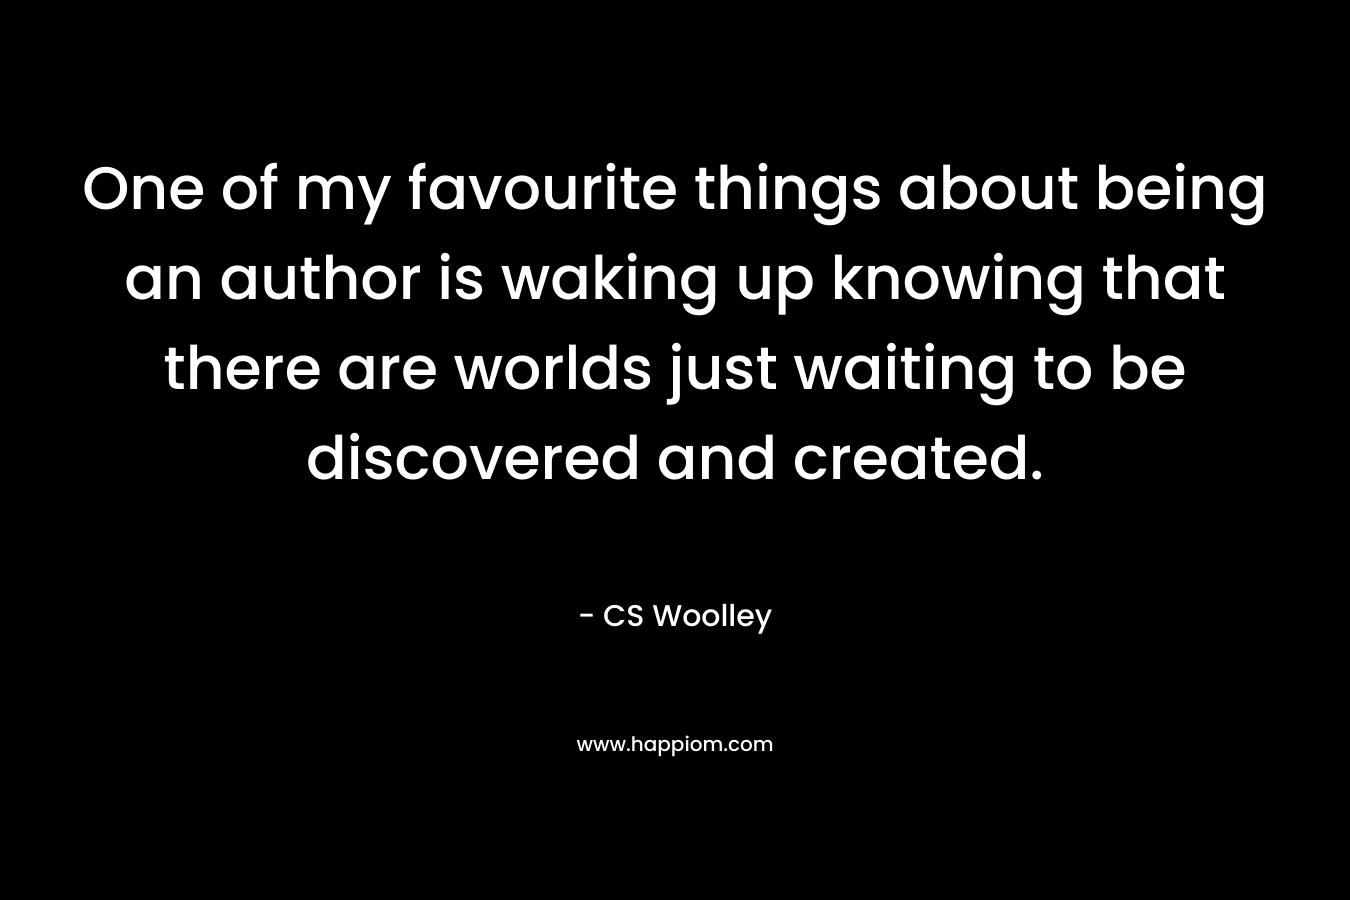 One of my favourite things about being an author is waking up knowing that there are worlds just waiting to be discovered and created.